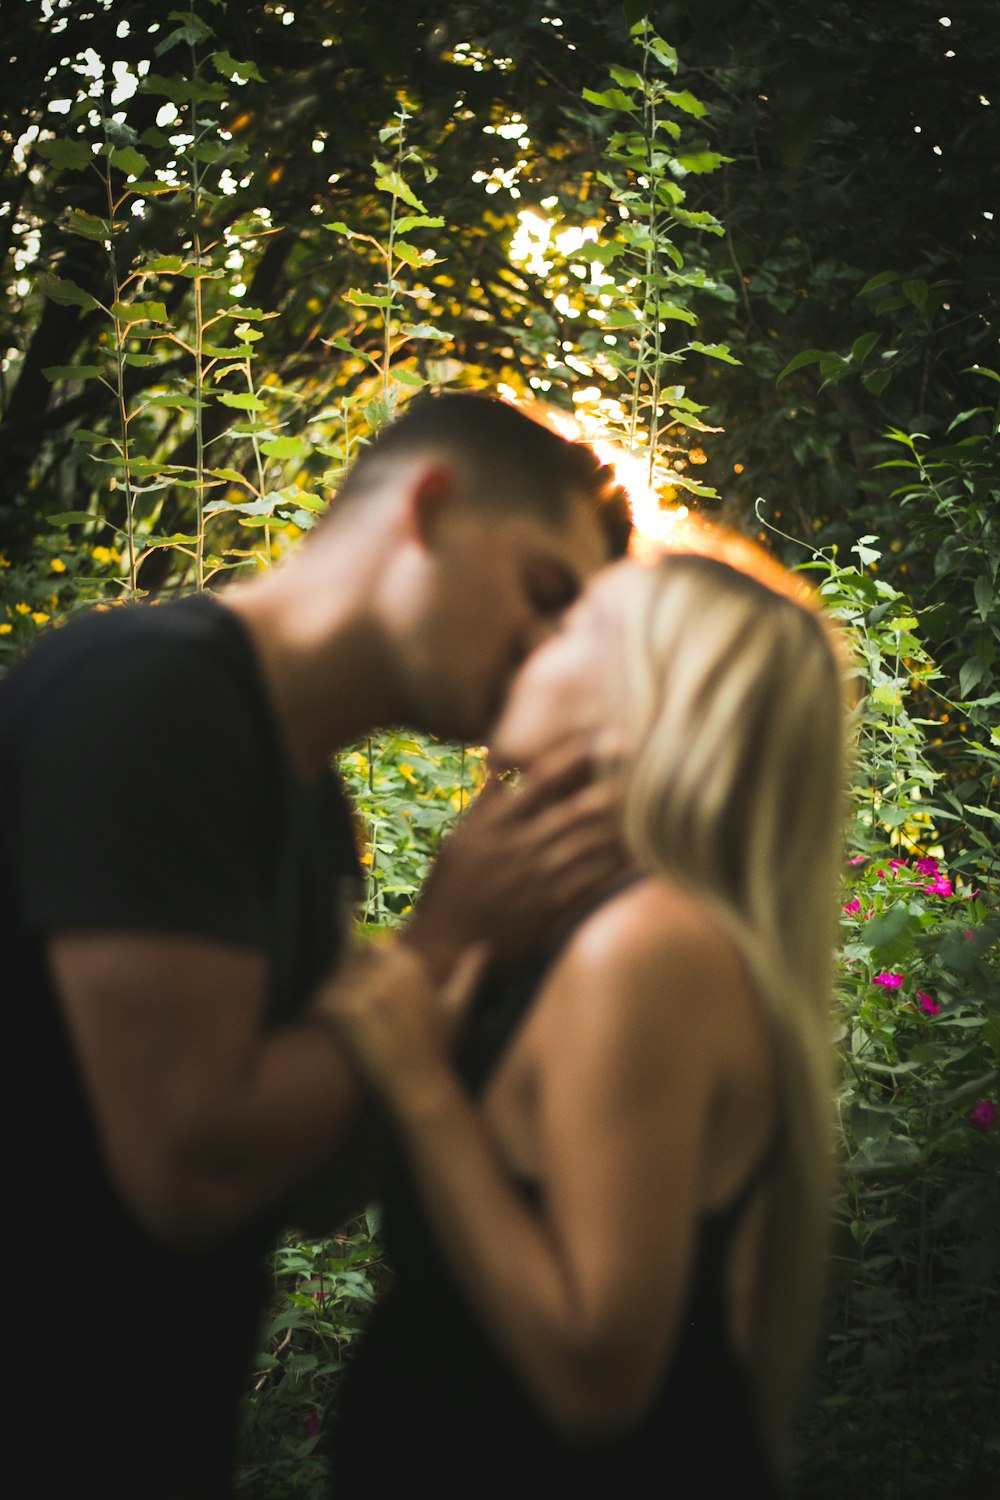 man and woman kissing under green trees at daytime